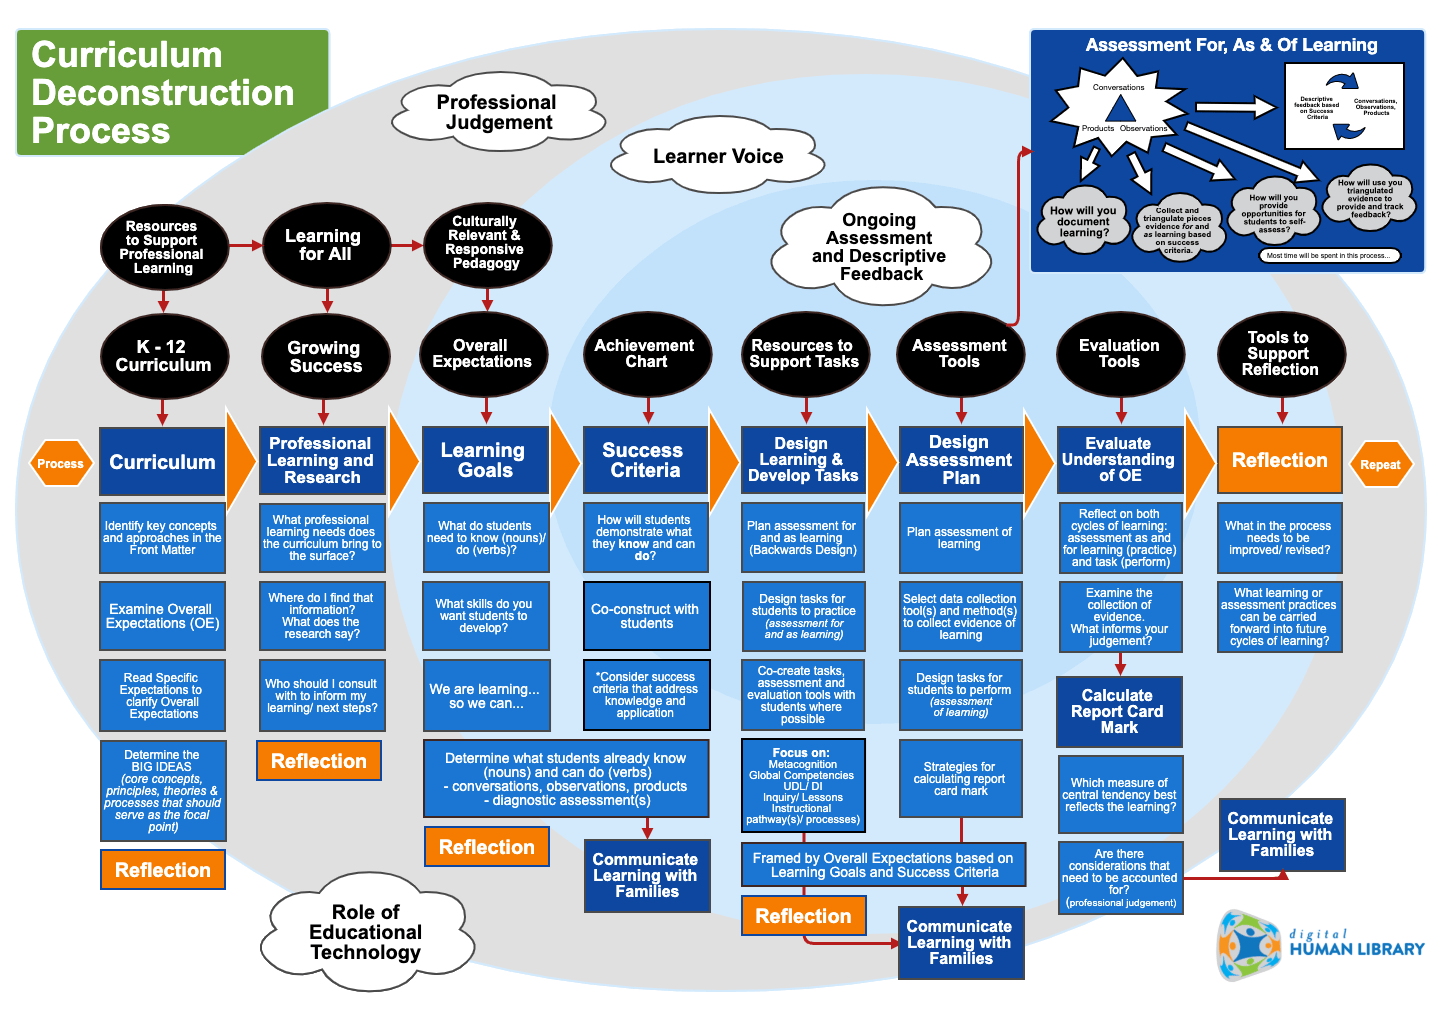 Chart showing curriculum deconstruction process at Digital Human Library